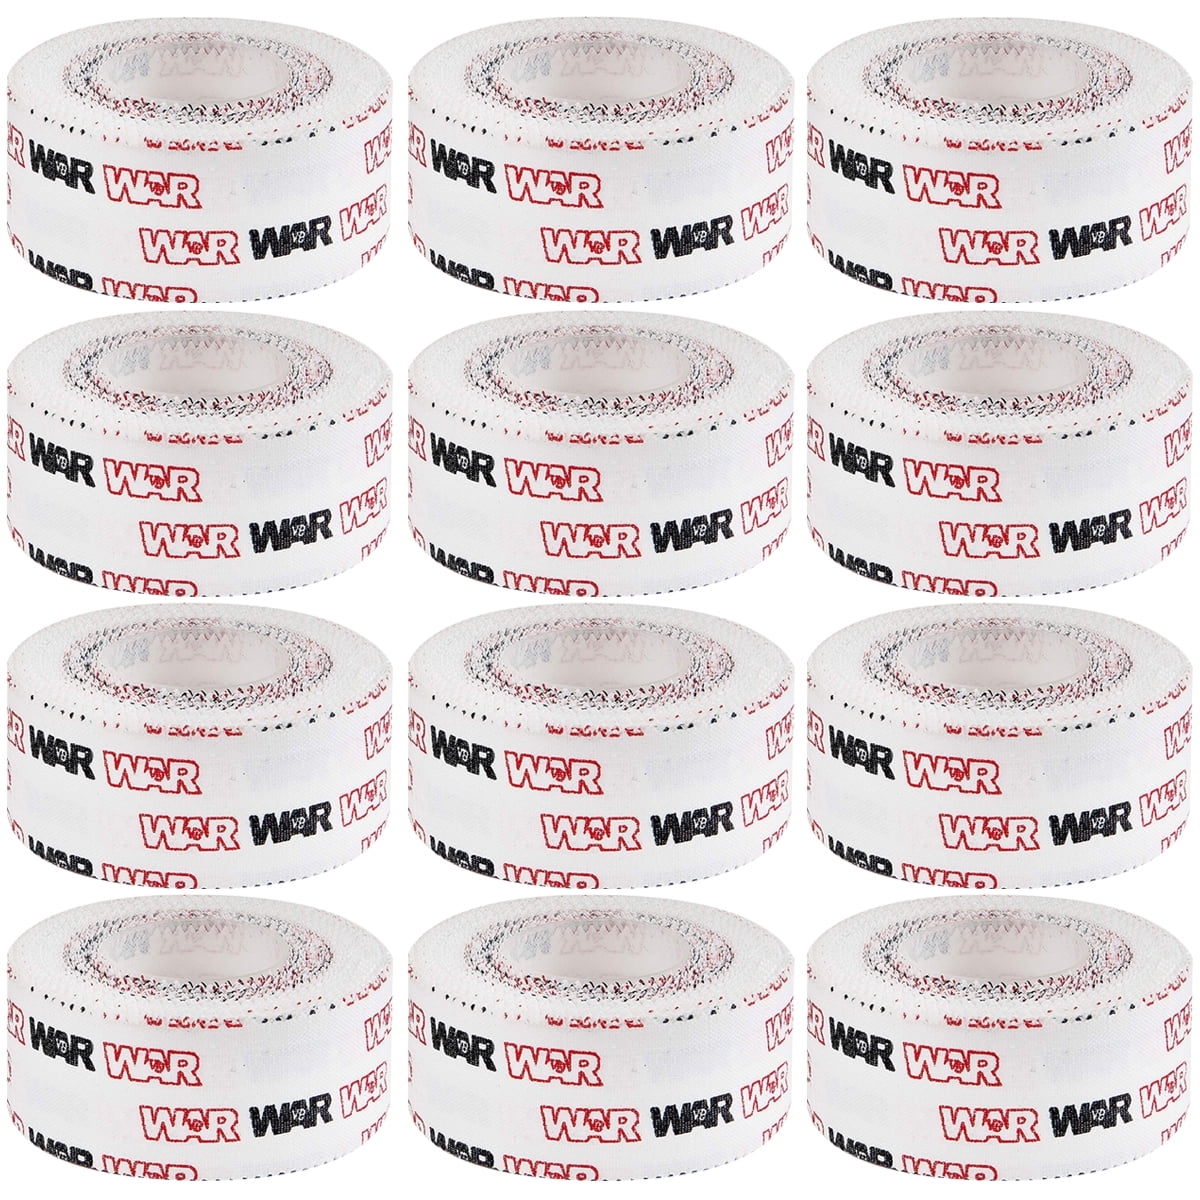 6 Rolls JP Armor Sports Athletic Tape One inch 1" Boxing MMA UFC new JParmor 